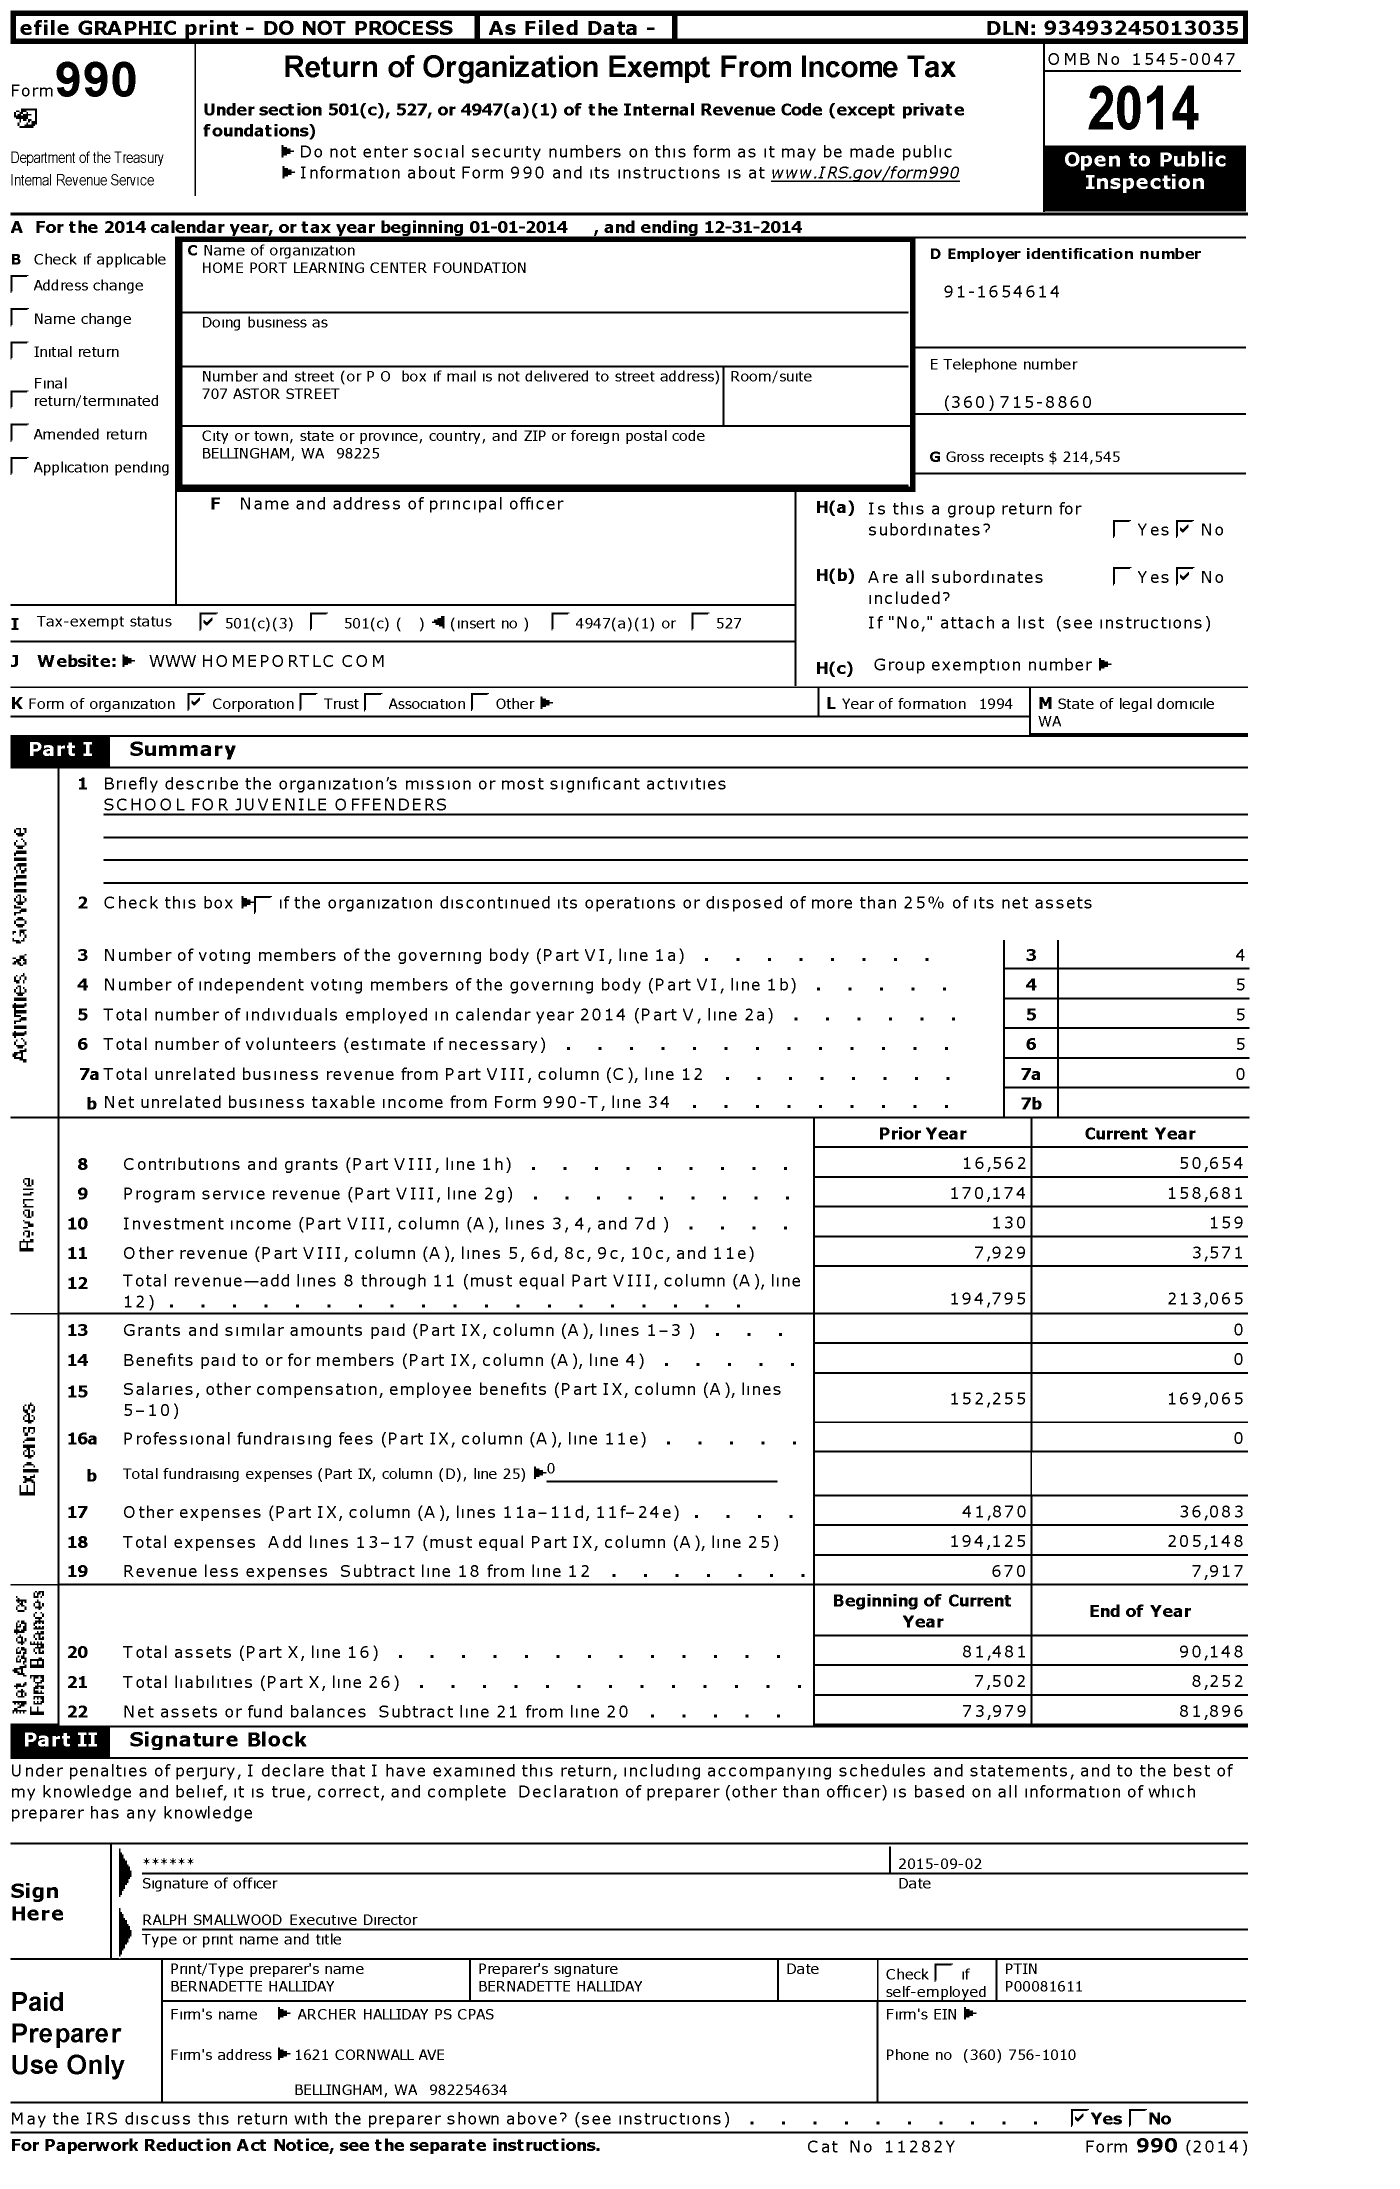 Image of first page of 2014 Form 990 for Home Port Learning Center Foundation